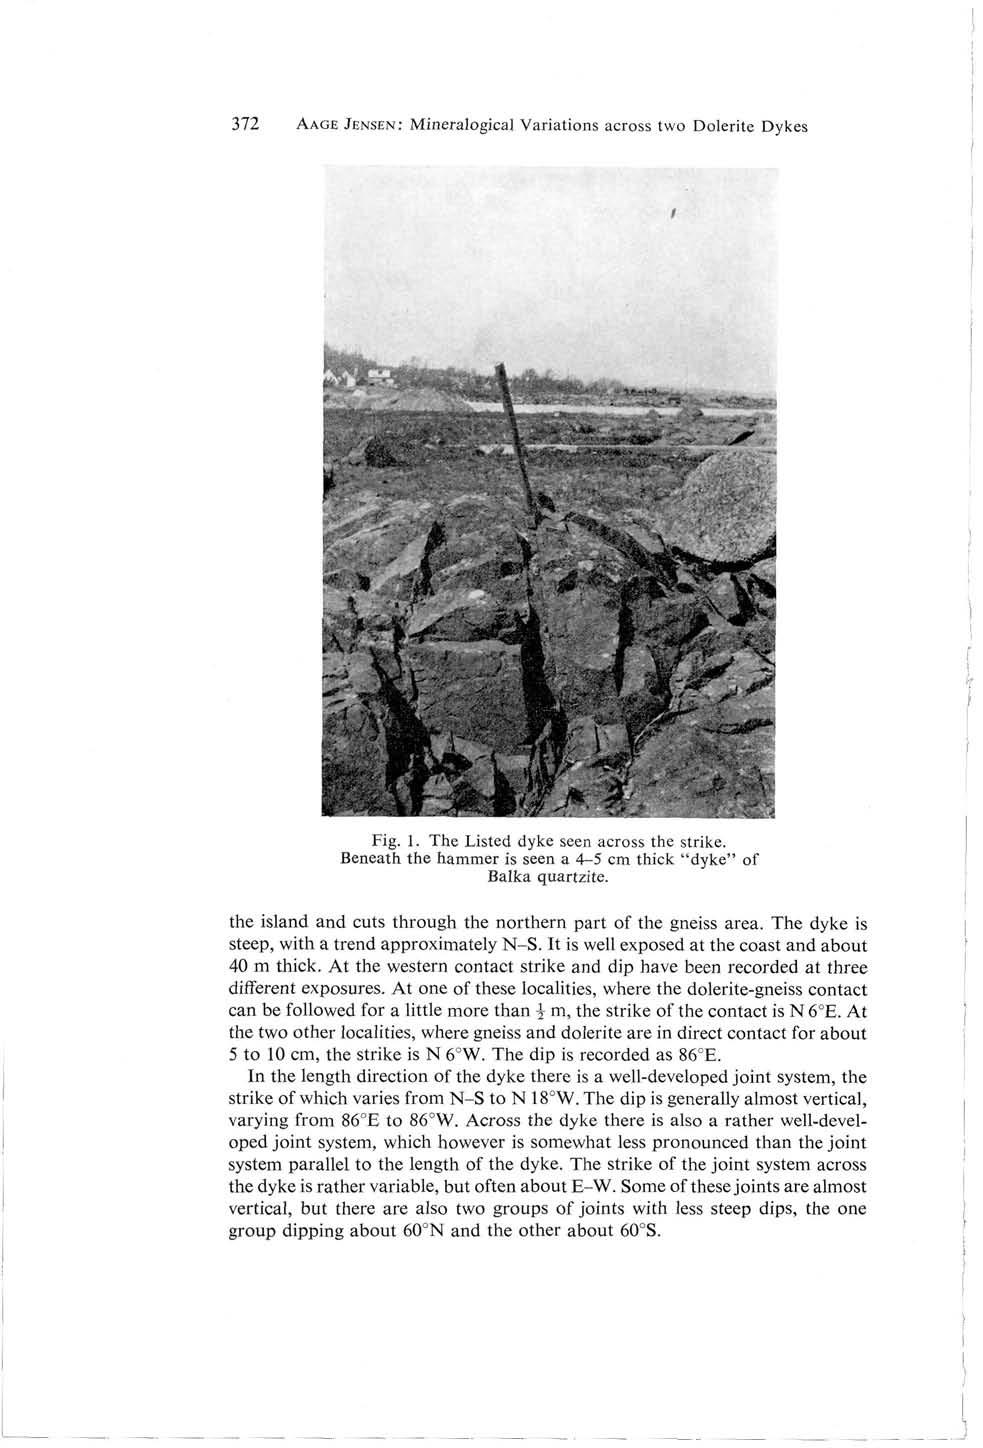 372 AAGE JENSEN: Mineralogical Variations across two Dolerite Dykes Fig. 1. The Listed dyke seen across the strike. Beneath the hammer is seen a 4-5 cm thick "dyke" of Balka quartzite.